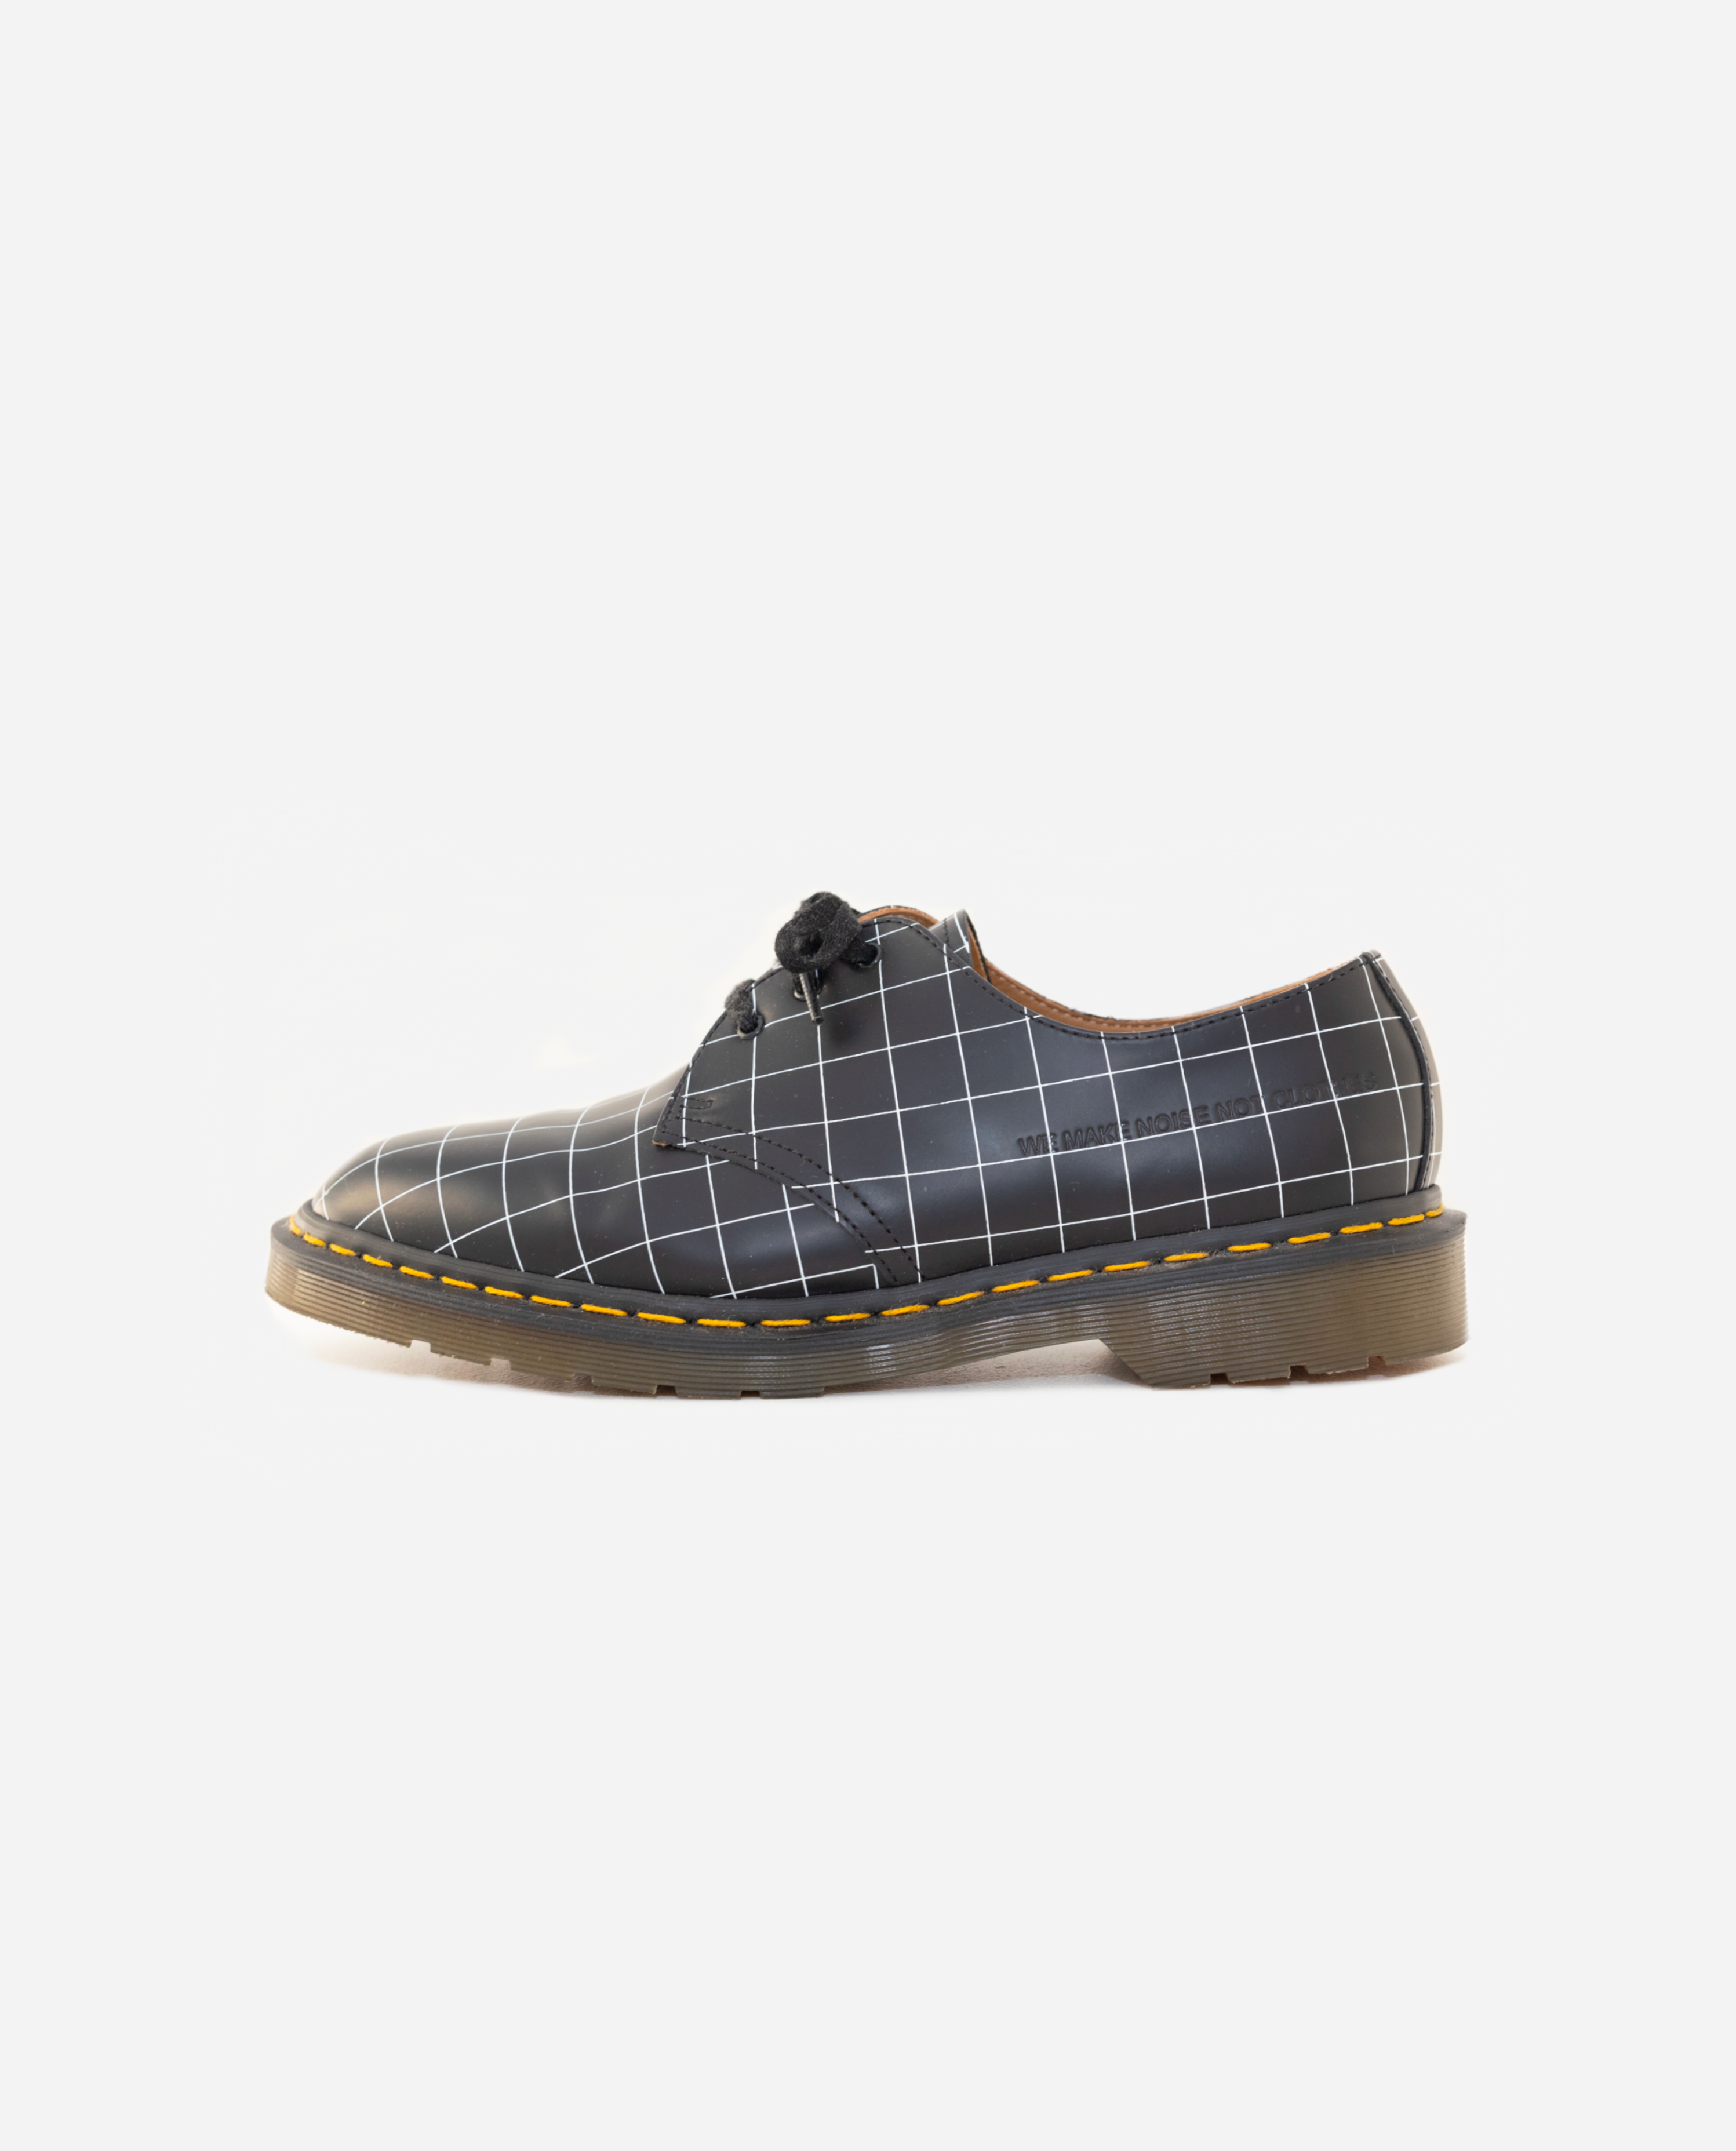 UNDERCOVER x DR MARTENS 1461